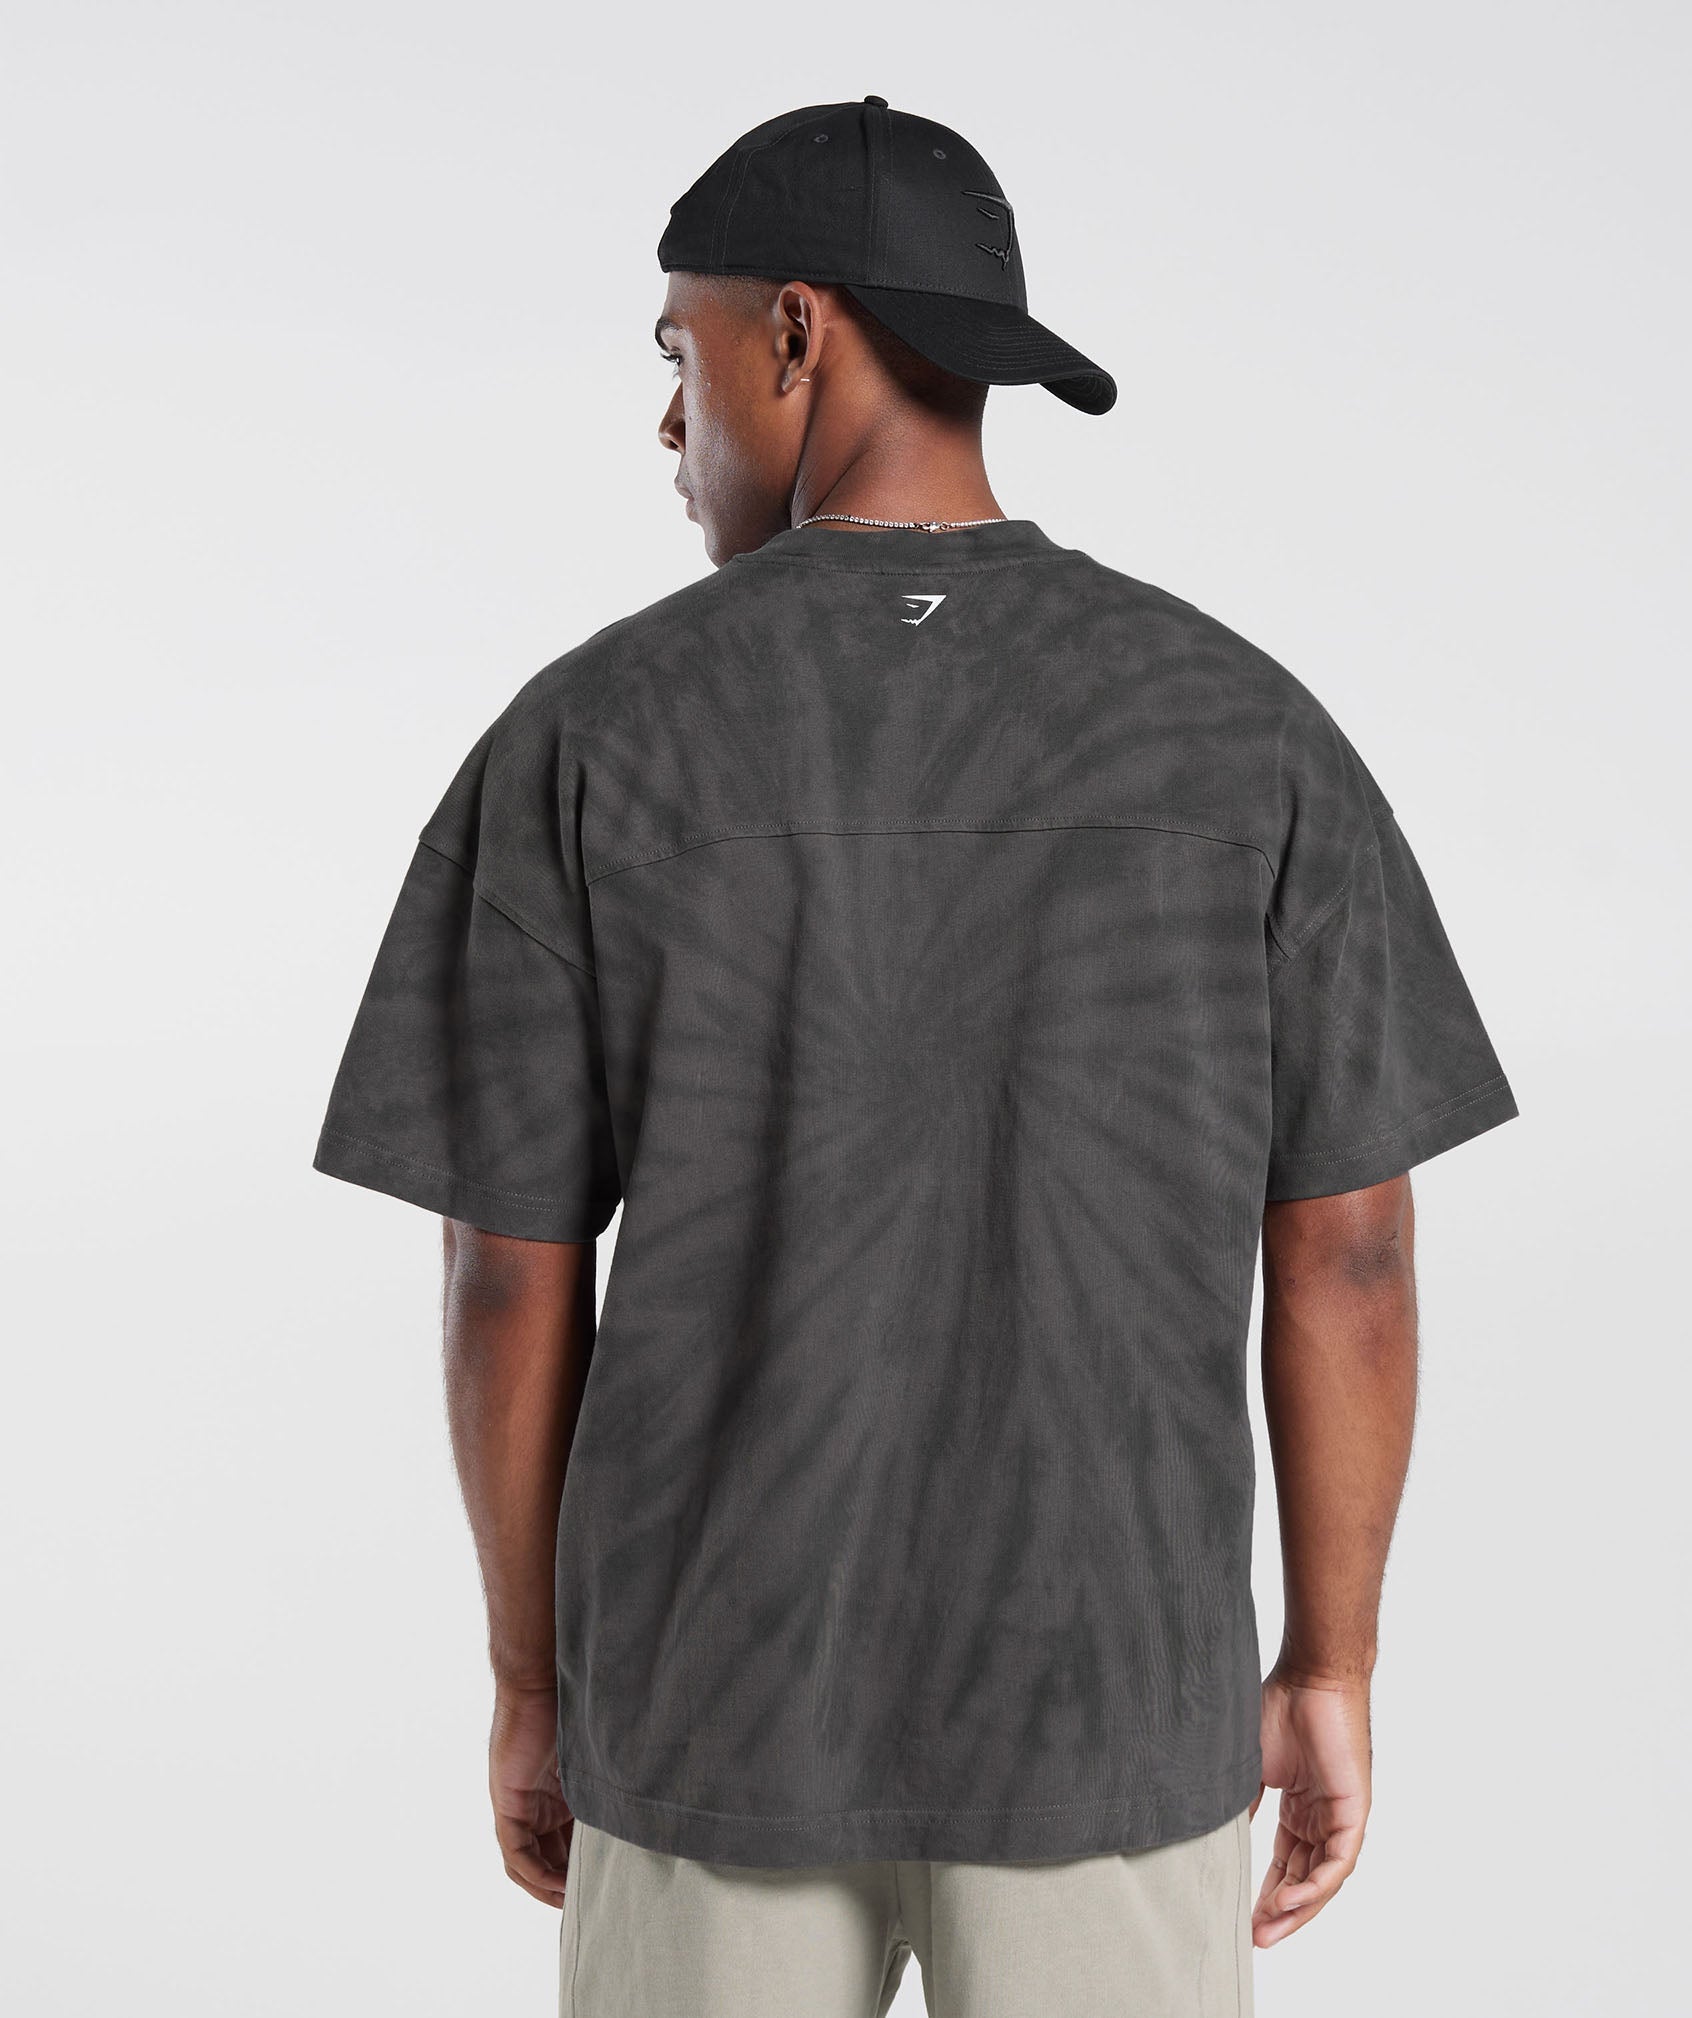 Rest Day T-Shirt in Silhouette Grey/Black/Spiral Optic Wash - view 2